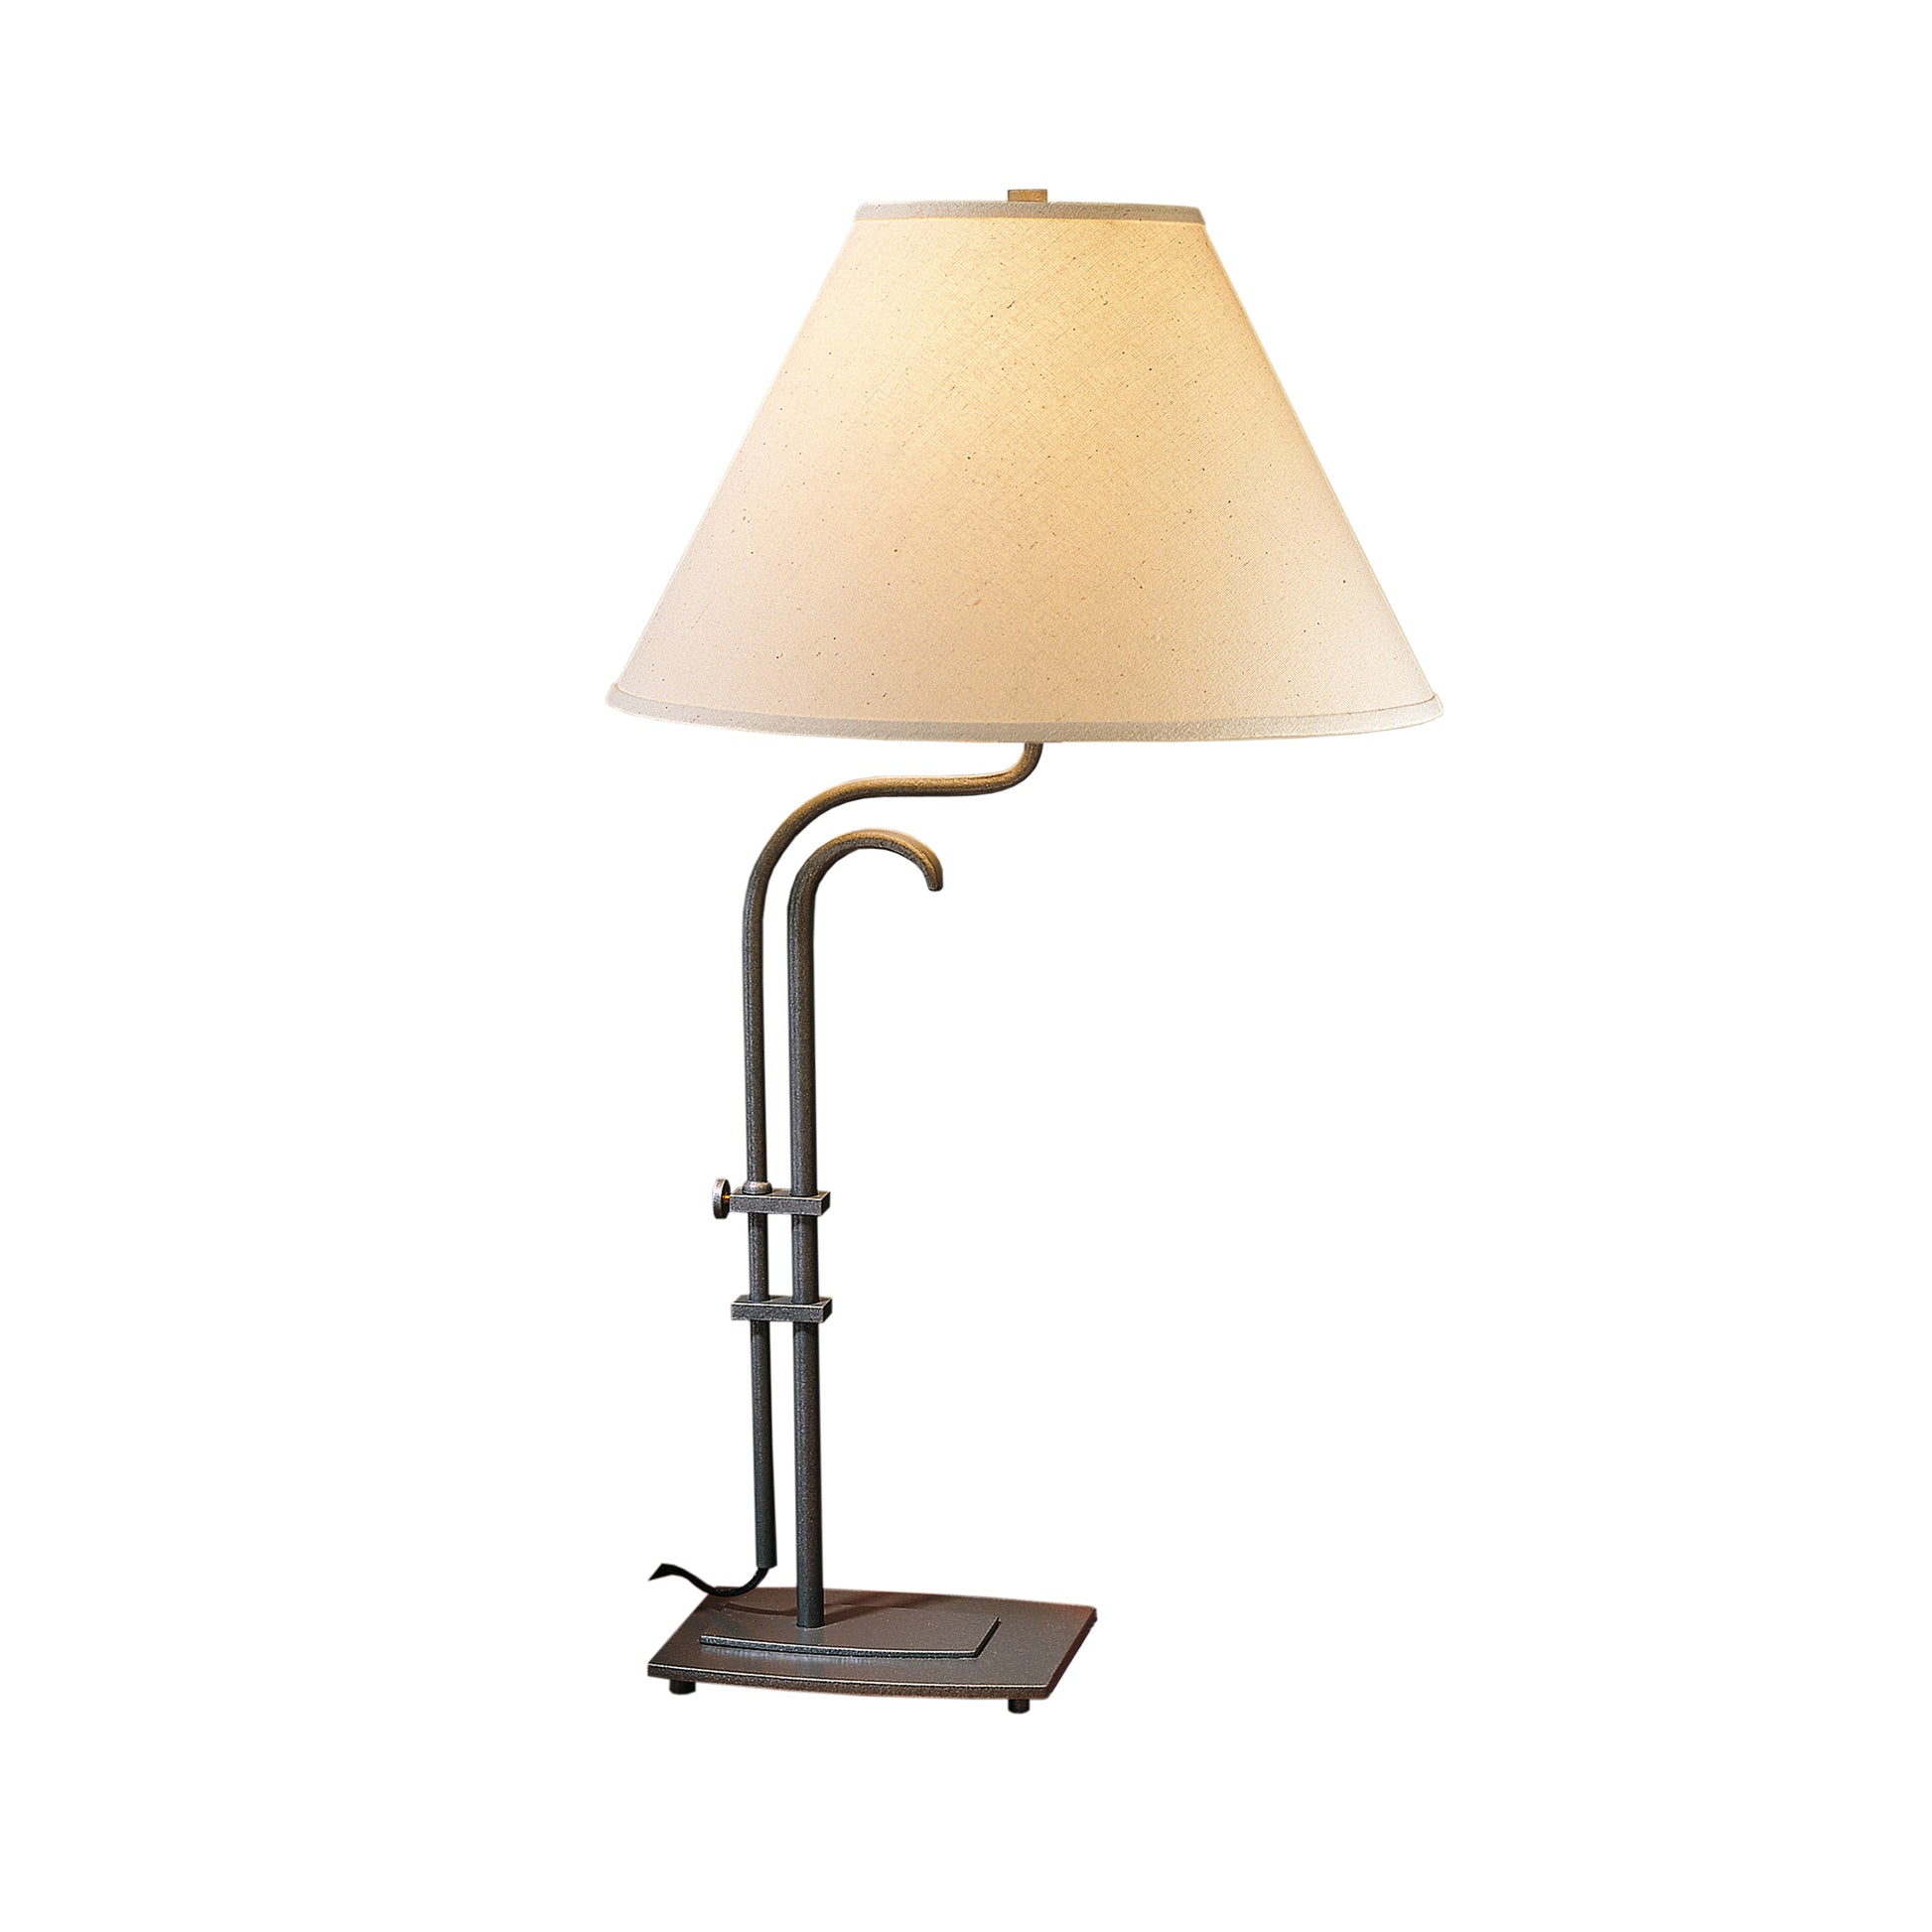 An Hubbardton Forge Metamorphic Table Lamp with a conical beige shade and a hand-forged metal curved arm on a square base, isolated on a white background.